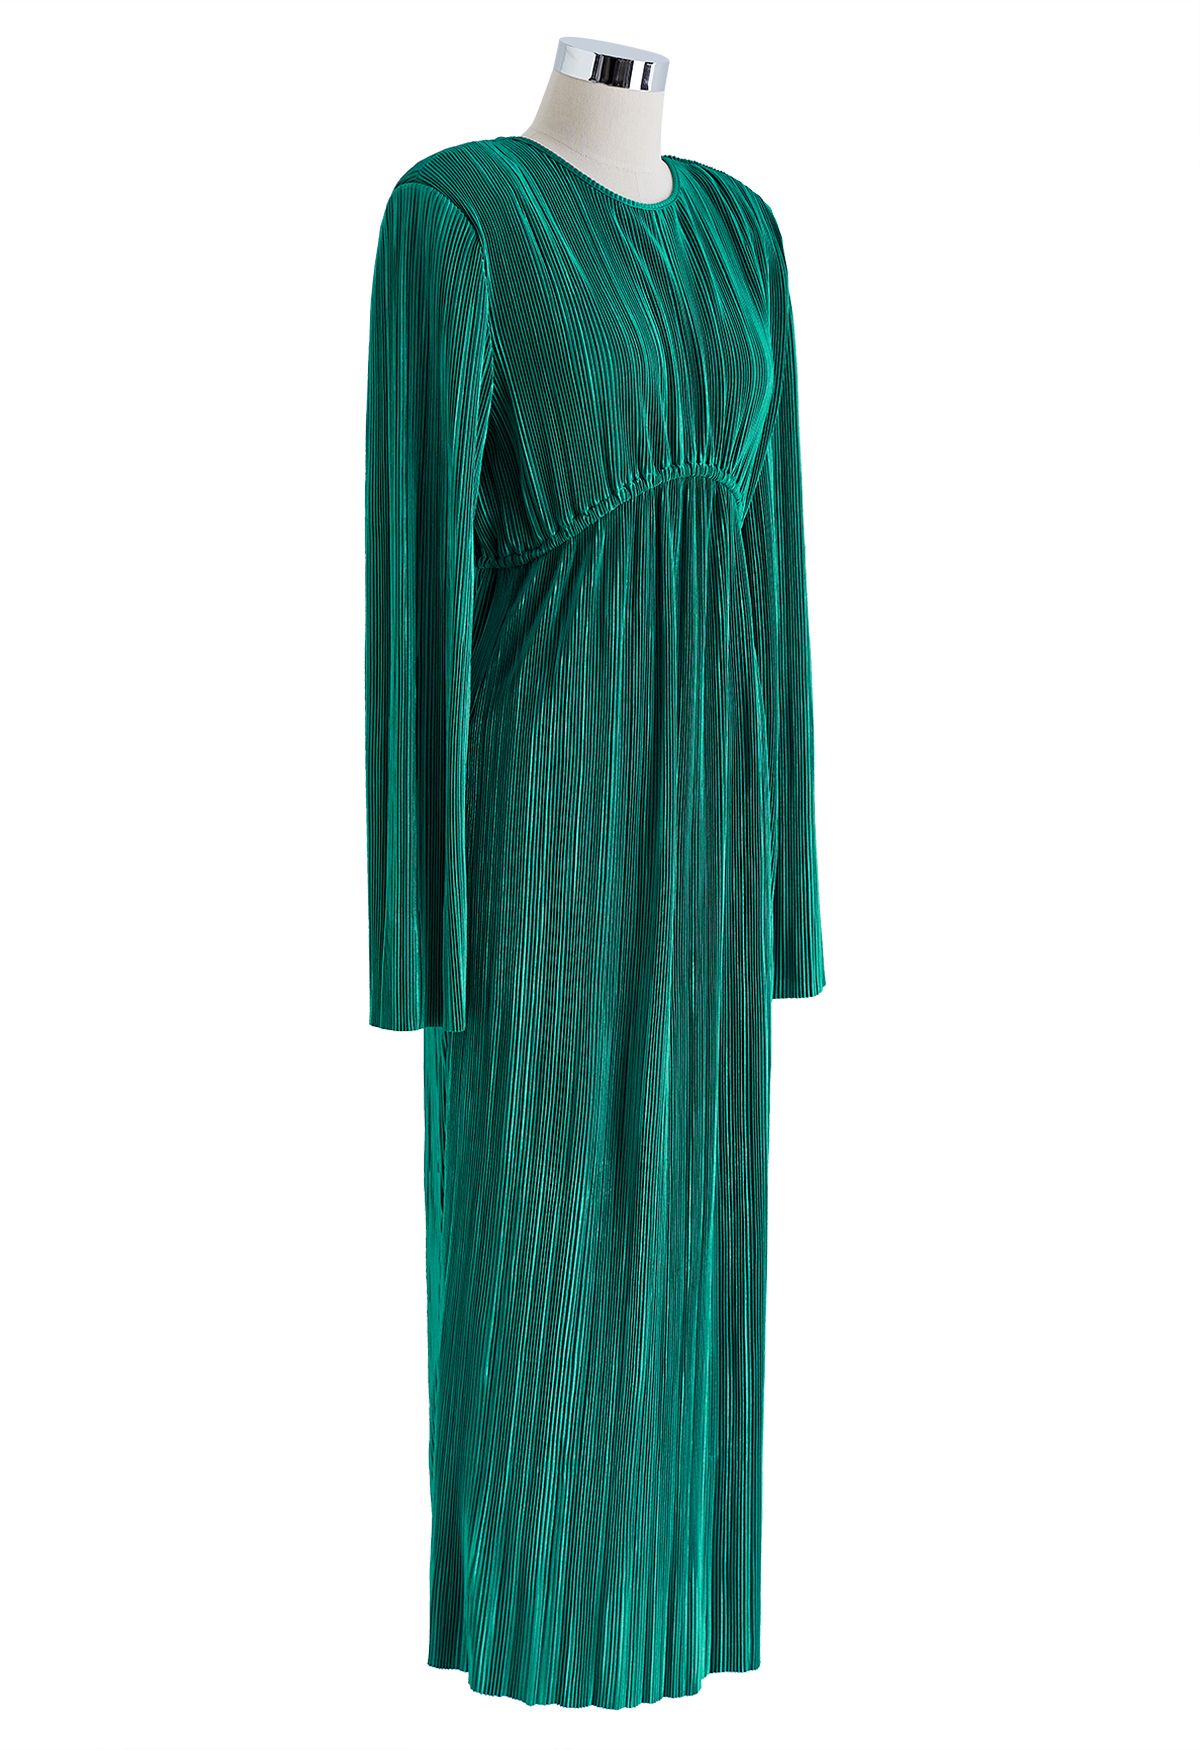 Pad Shoulder Open Back Plisse Midi Dress in Emerald - Retro, Indie and ...